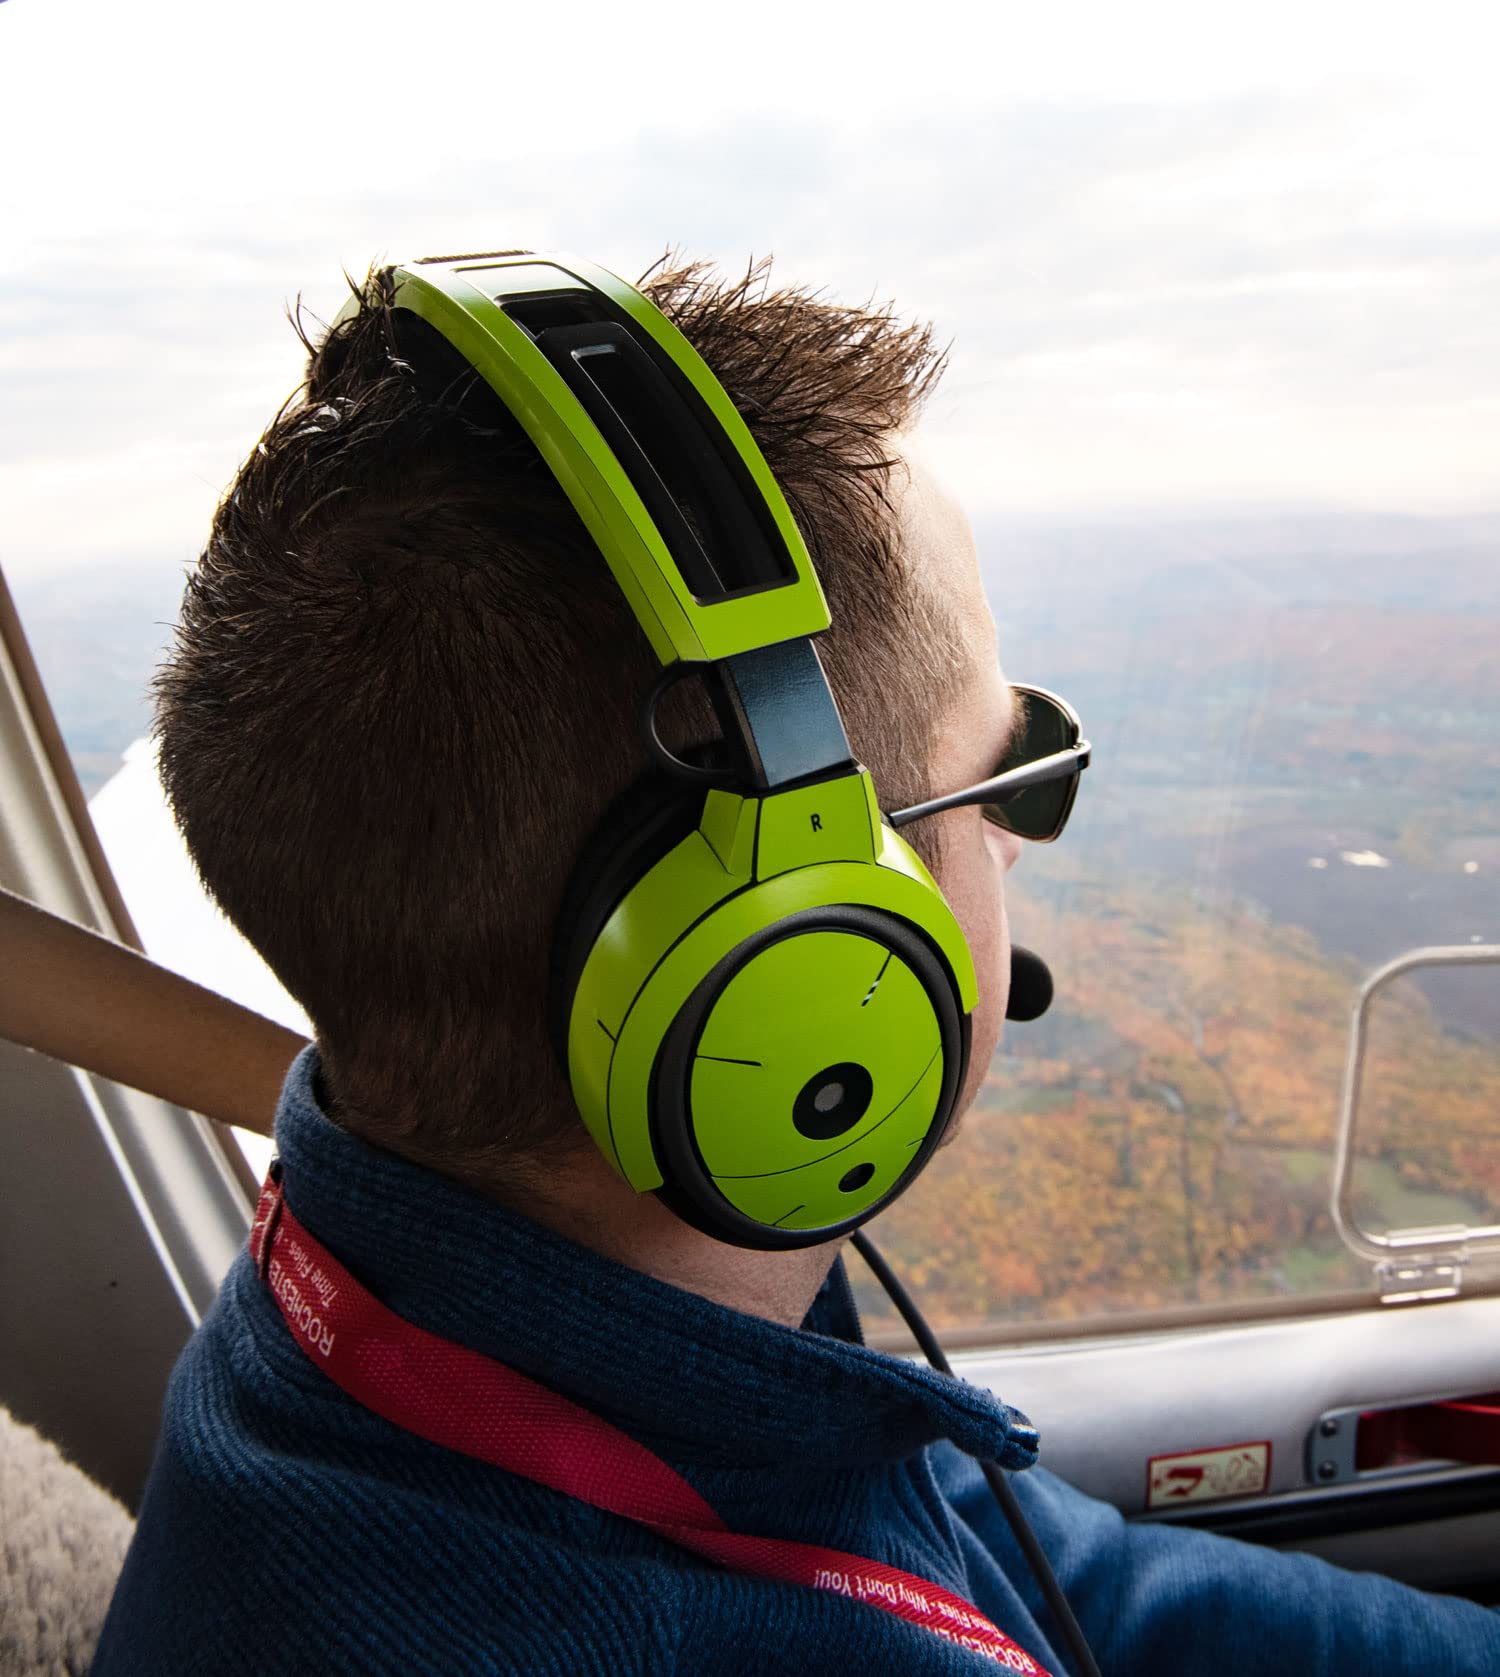 EntireFlight Alpha 20 Flight Skins-Personalization Decals for Your Bose Aviation Headset-Works with All Bose A20 Noise Canceling Headphones-Makes Great Pilot Gifts-Headphones Not Included(Pink)